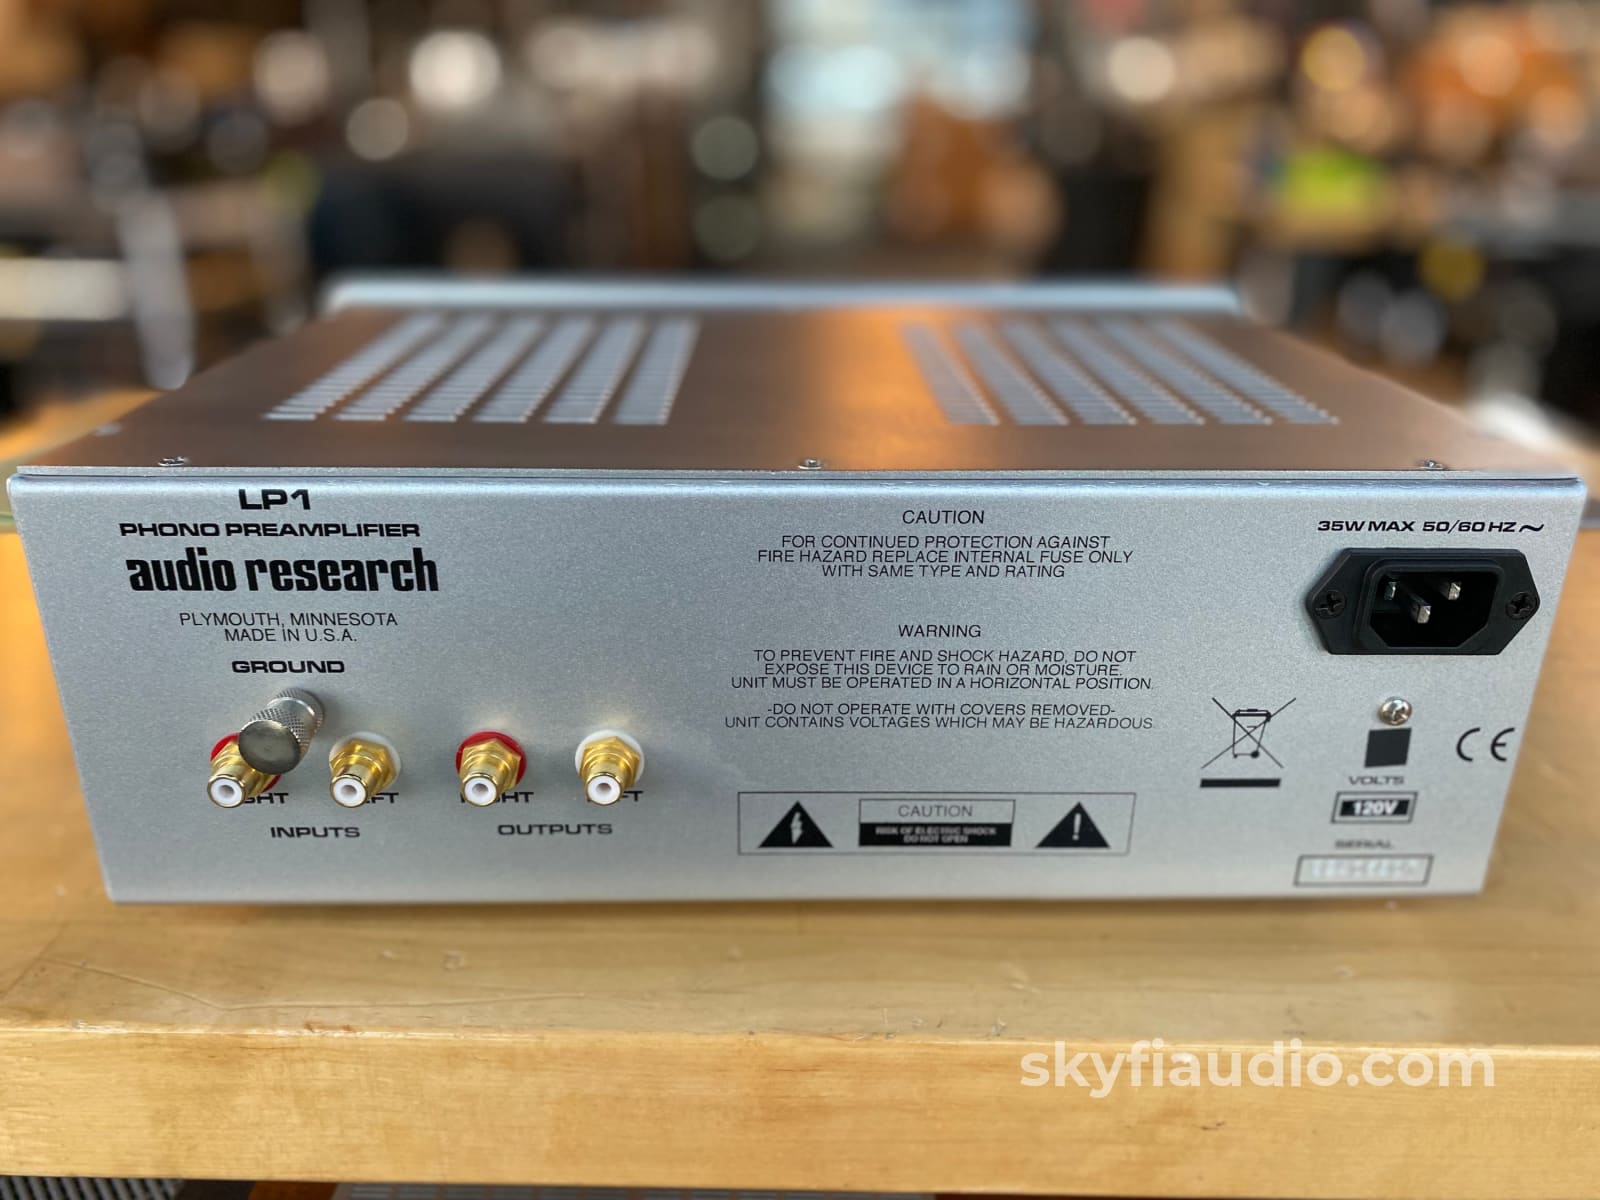 Audio Research Lp1 Phono Preamp Preamplifier